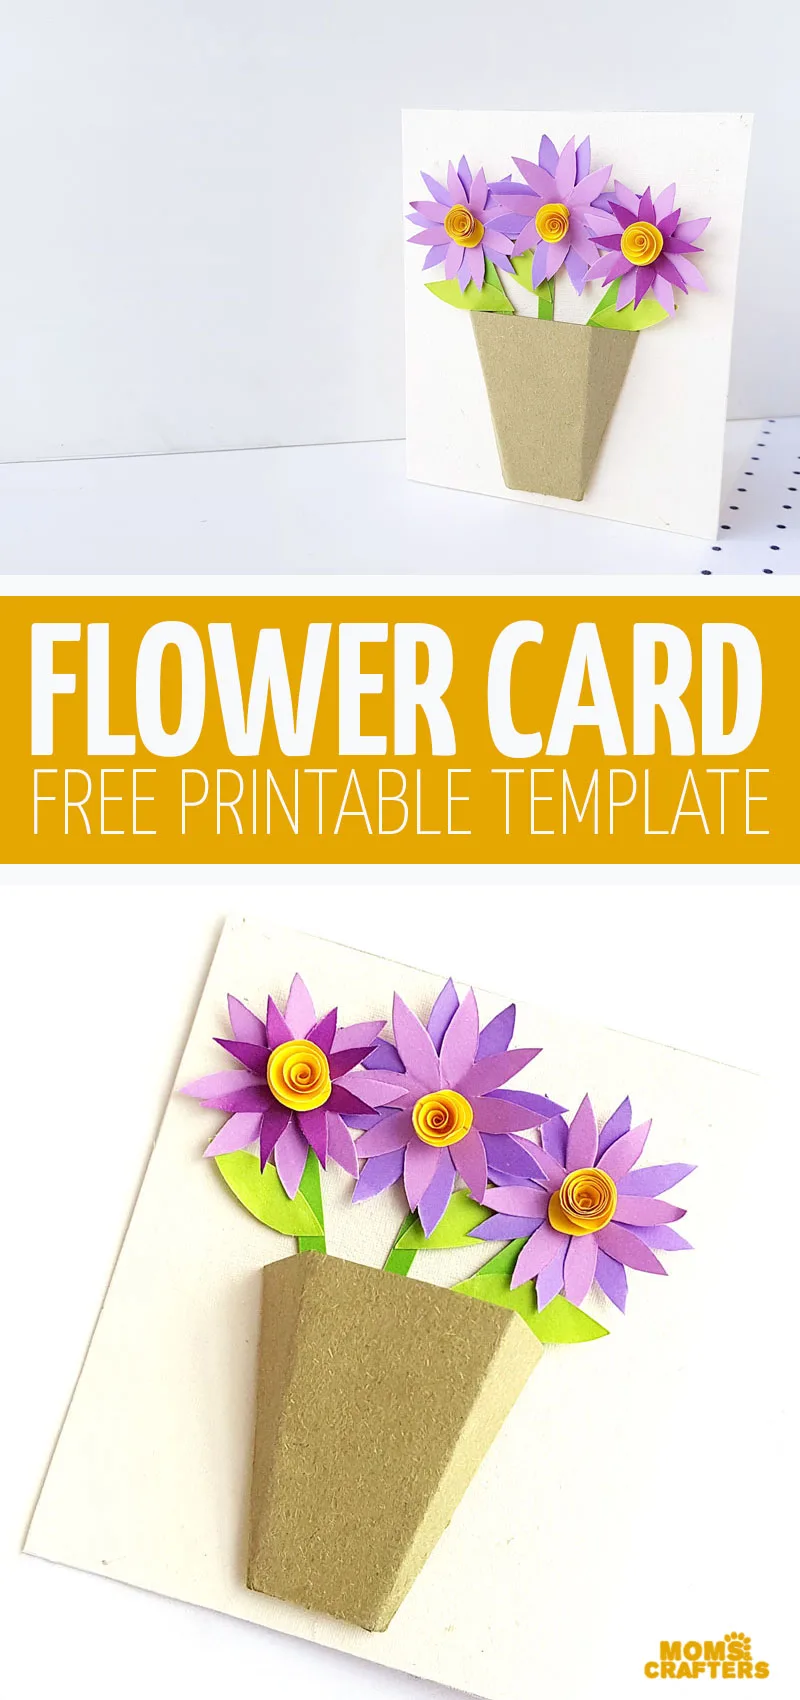 Learn how to make a 3D flower bouquet card with this free printable paper craft template! This is fun for Mother's Day, or do it in poinsettia colors for Christmas.